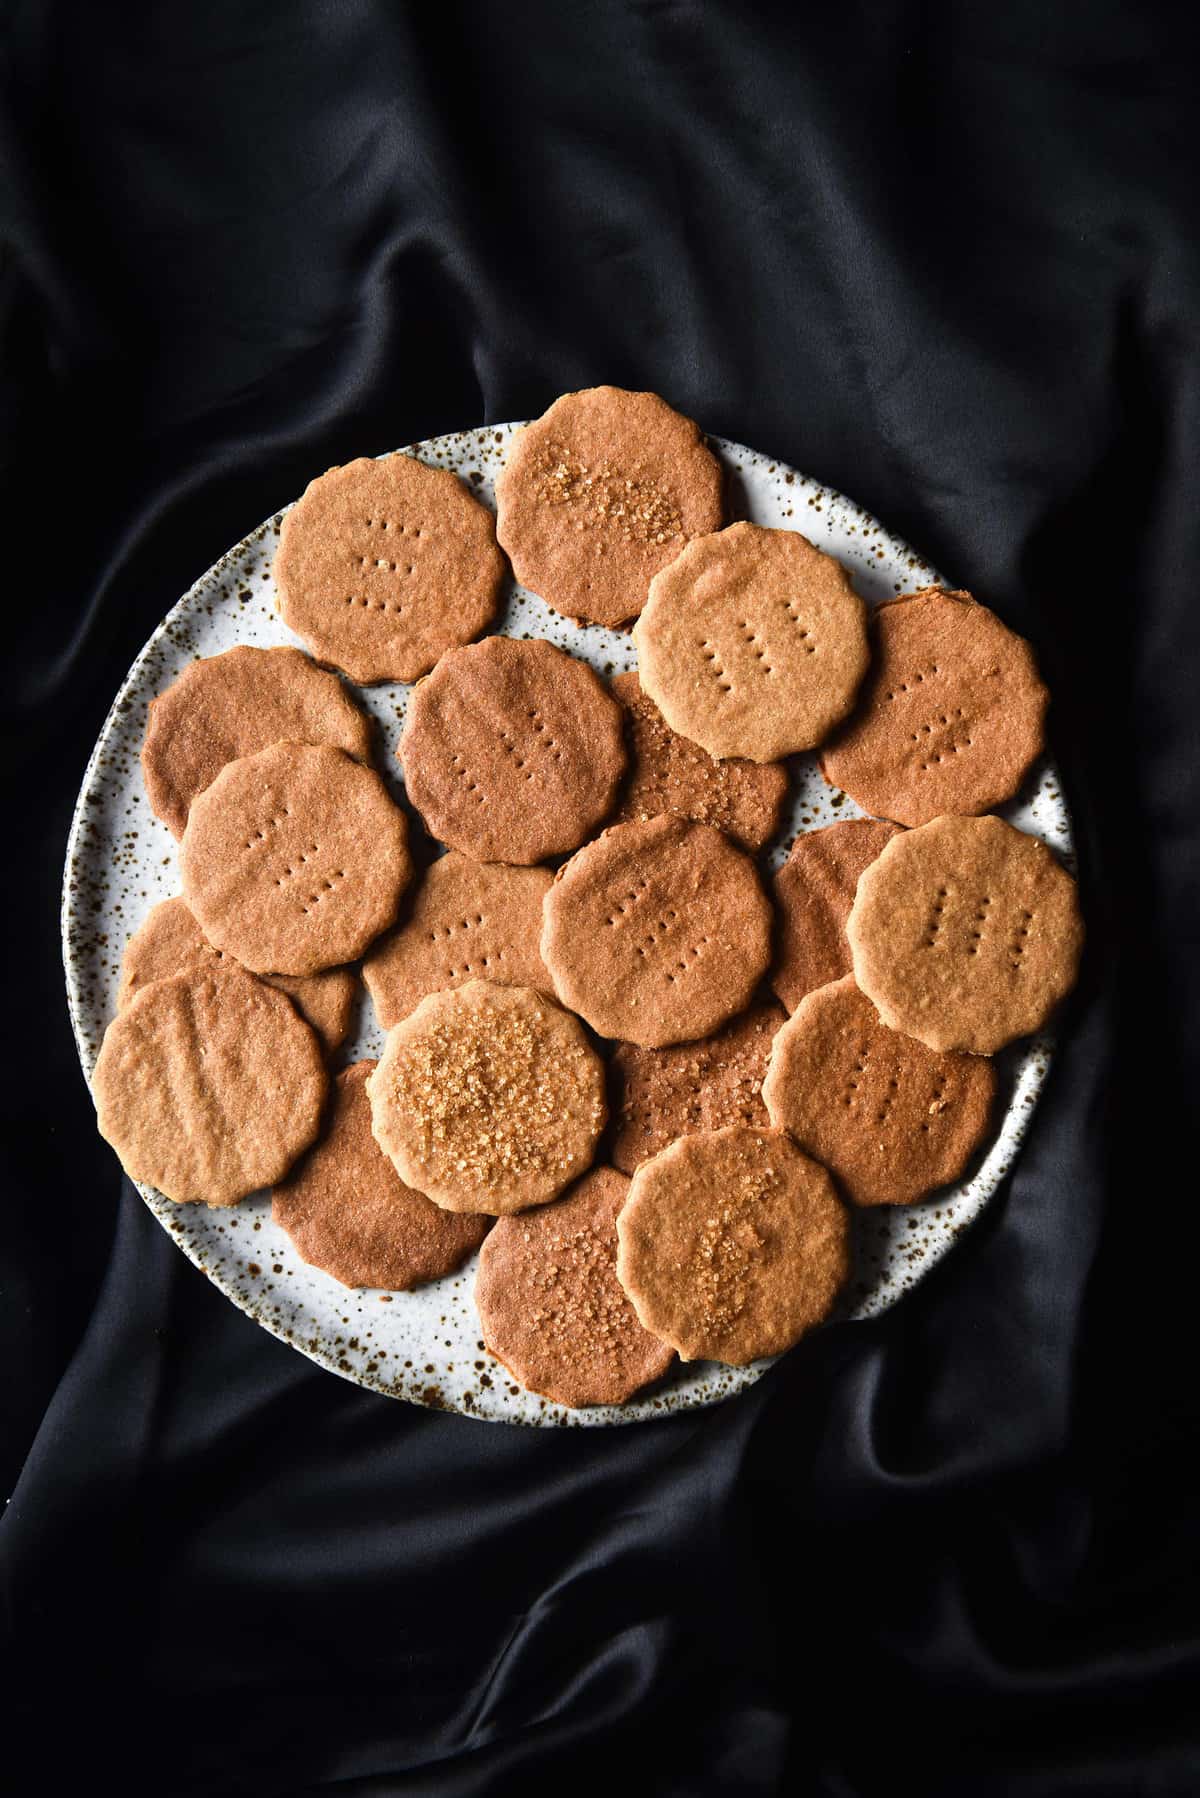 An aerial view of a plate of gluten free Graham crackers on a white ceramic plate that sits on a silky black fabric